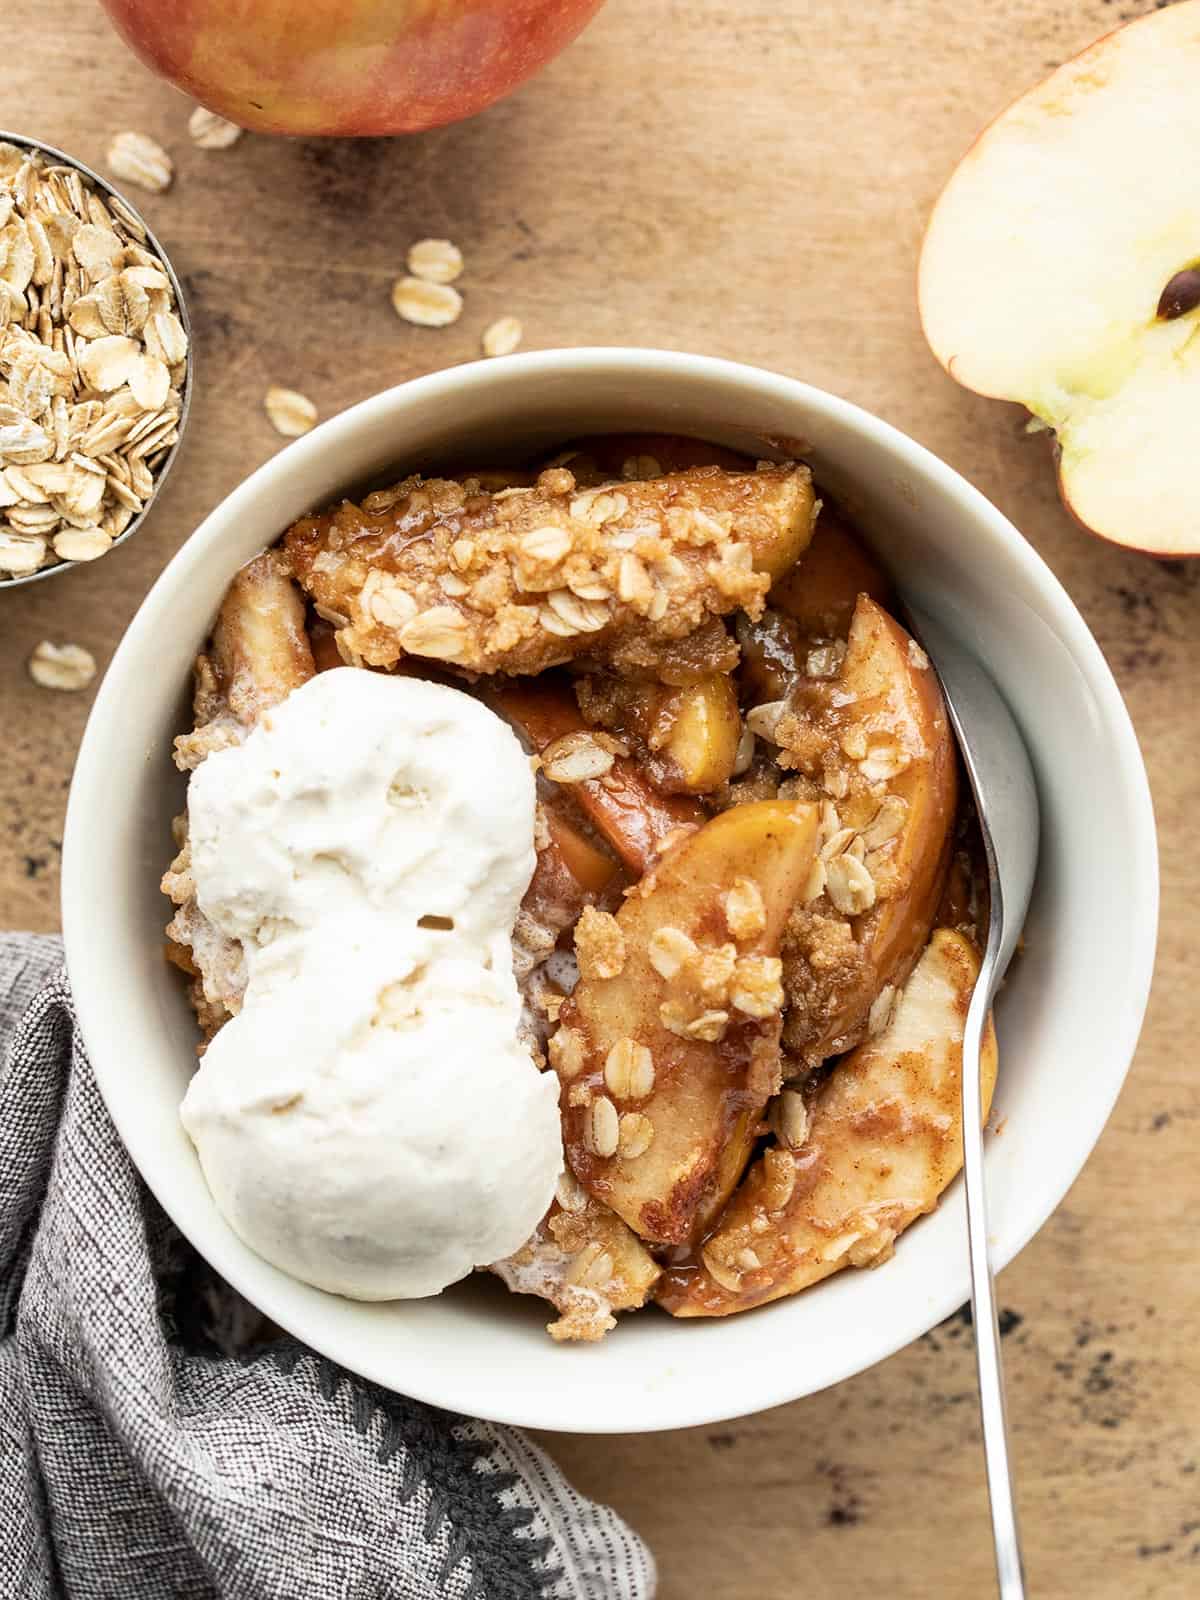 Overhead view of a bowl of apple crisp with ice cream